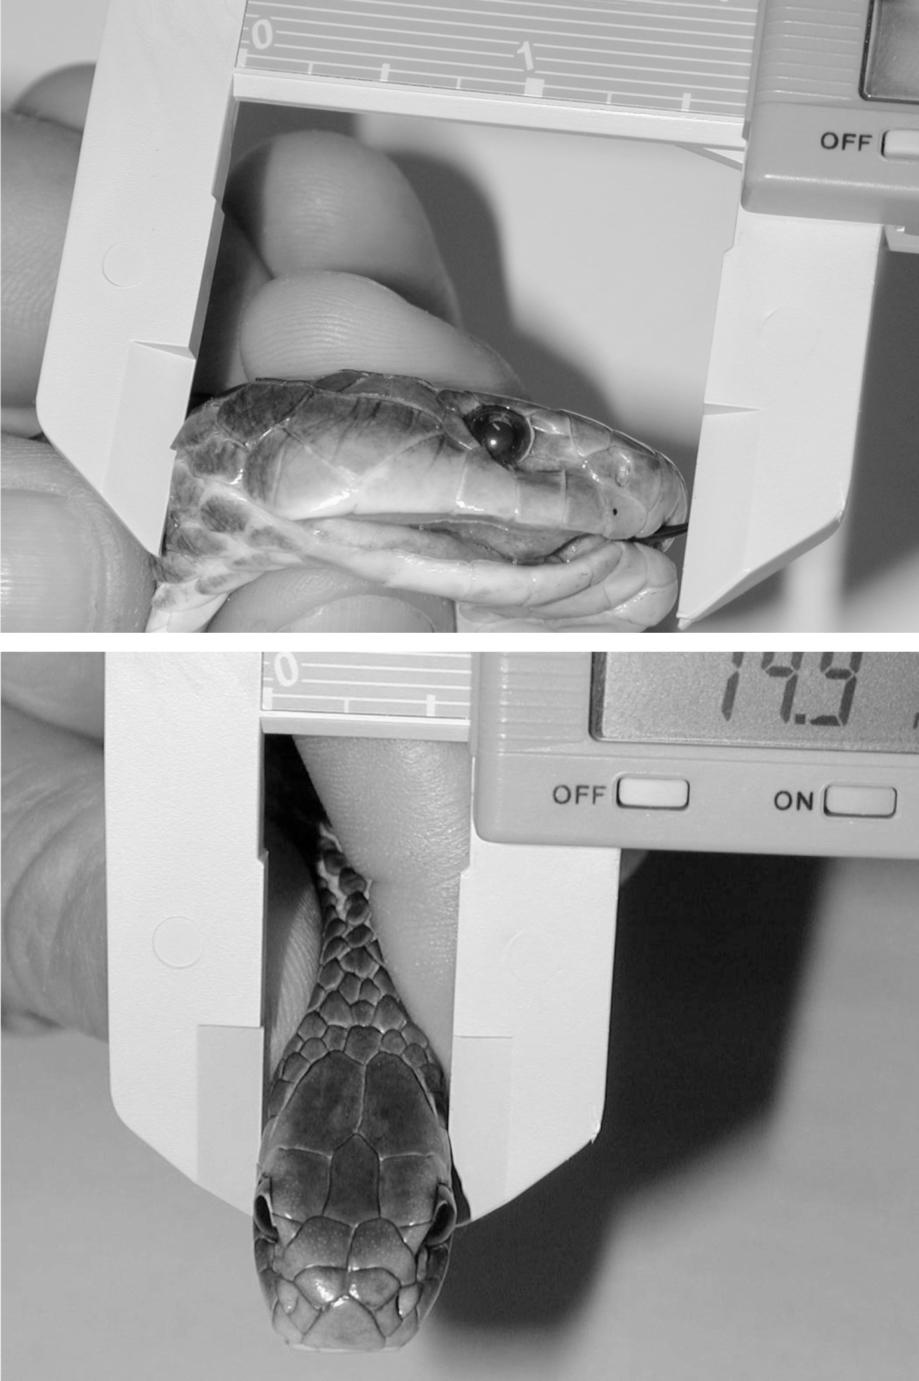 1584 P.J. Mirtschin et al. / Toxicon 40 (2002) 1581 1592 Fig. 1. Methods of measuring head length (for a tigersnake, N. scutatus ) and head width (for a brownsnake, P. textilis ).